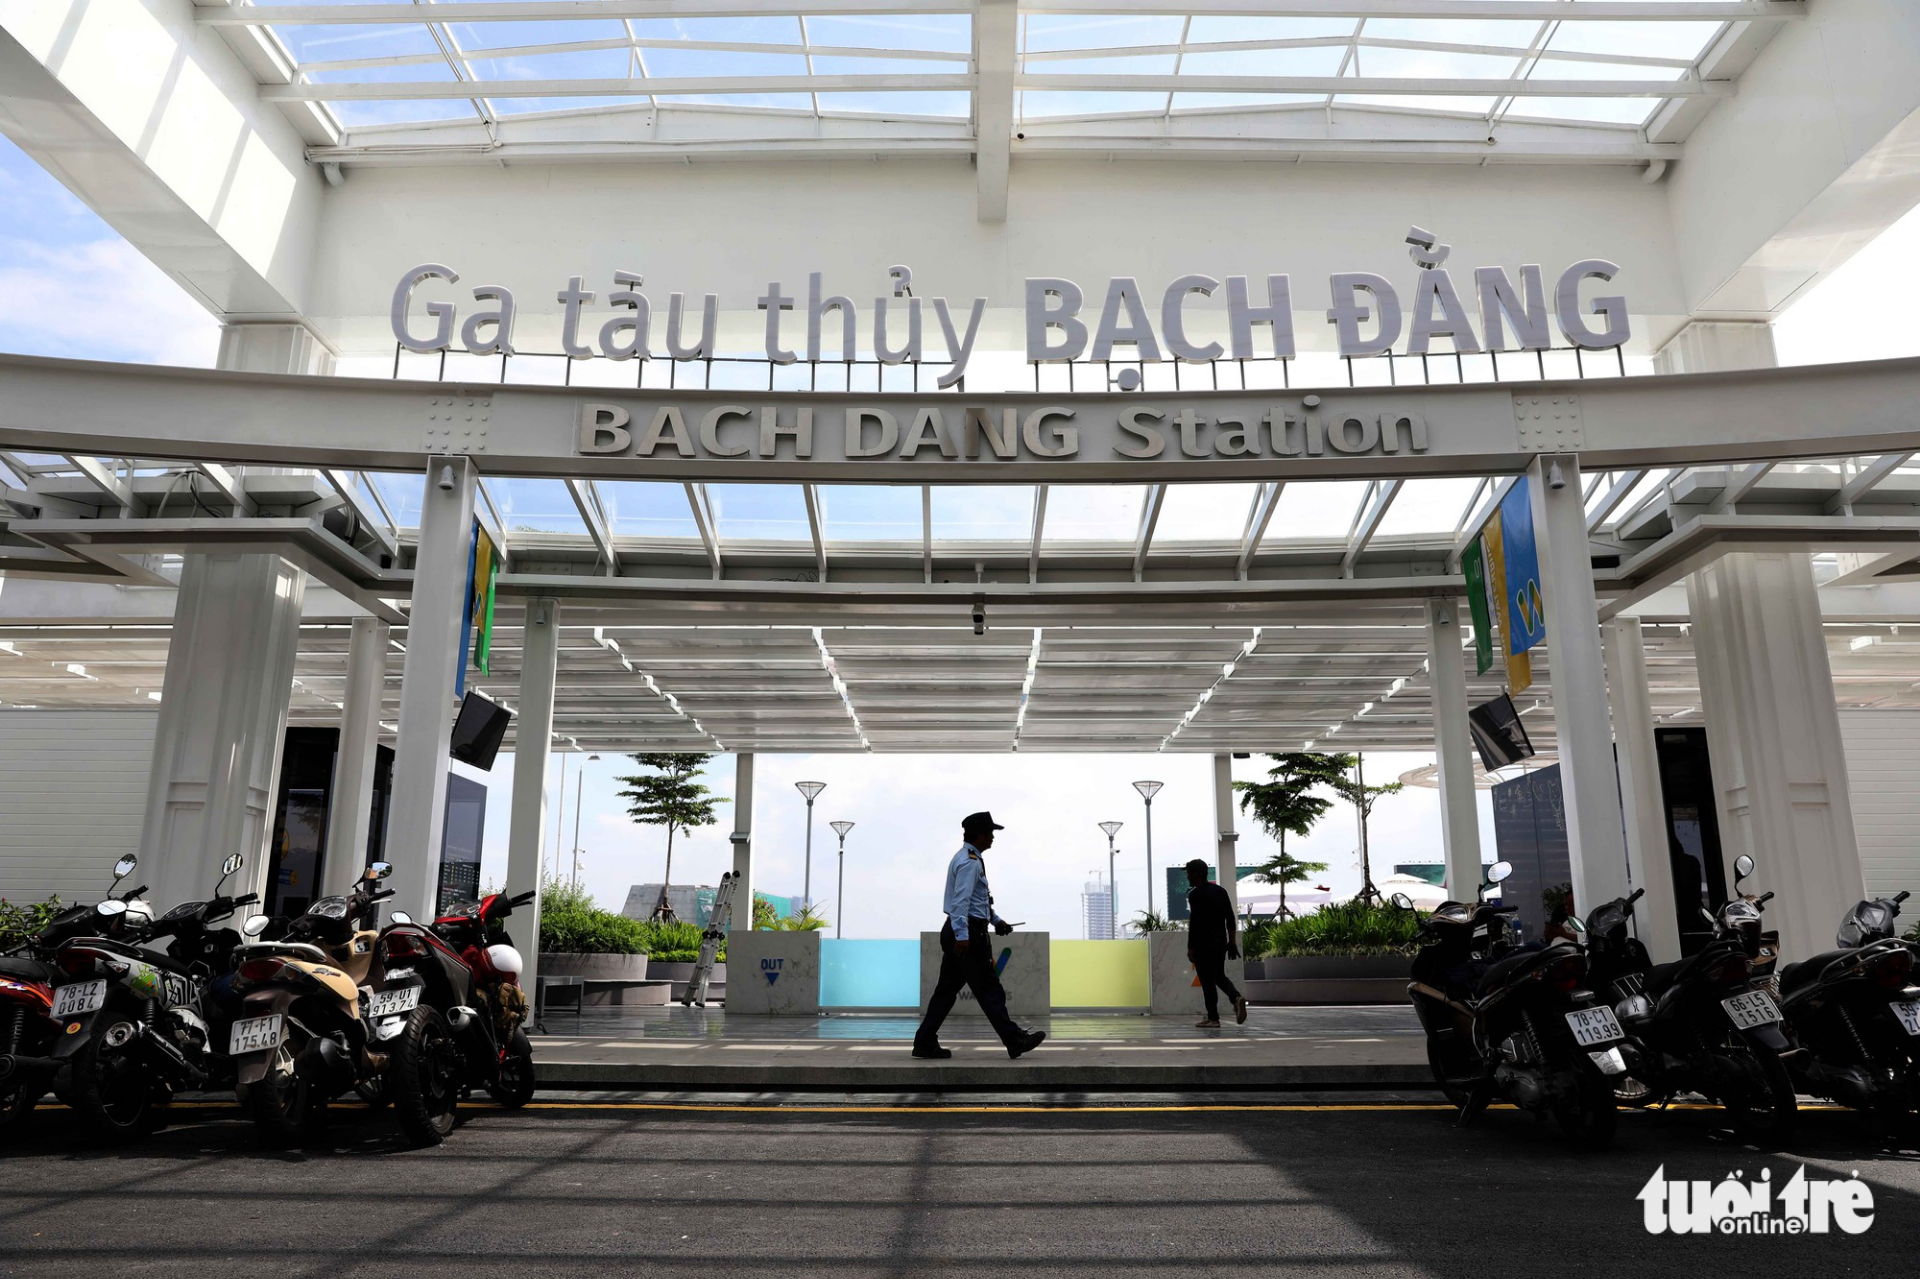 The entrance of Bach Dang Station